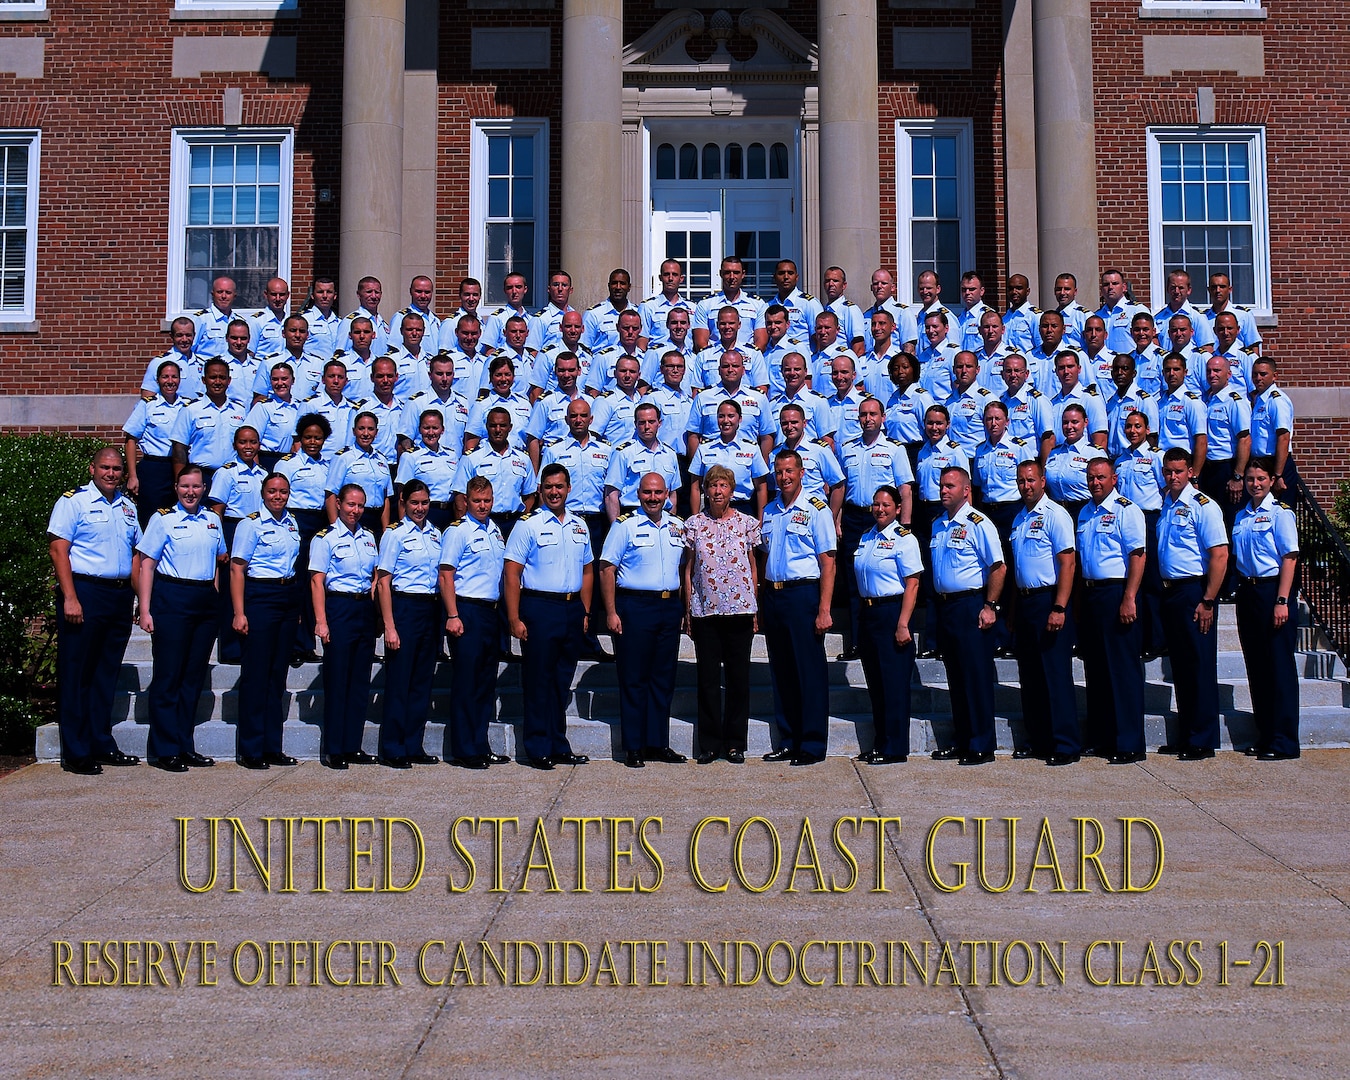 Reserve Officer Candidate Indoctrination Class 1-21